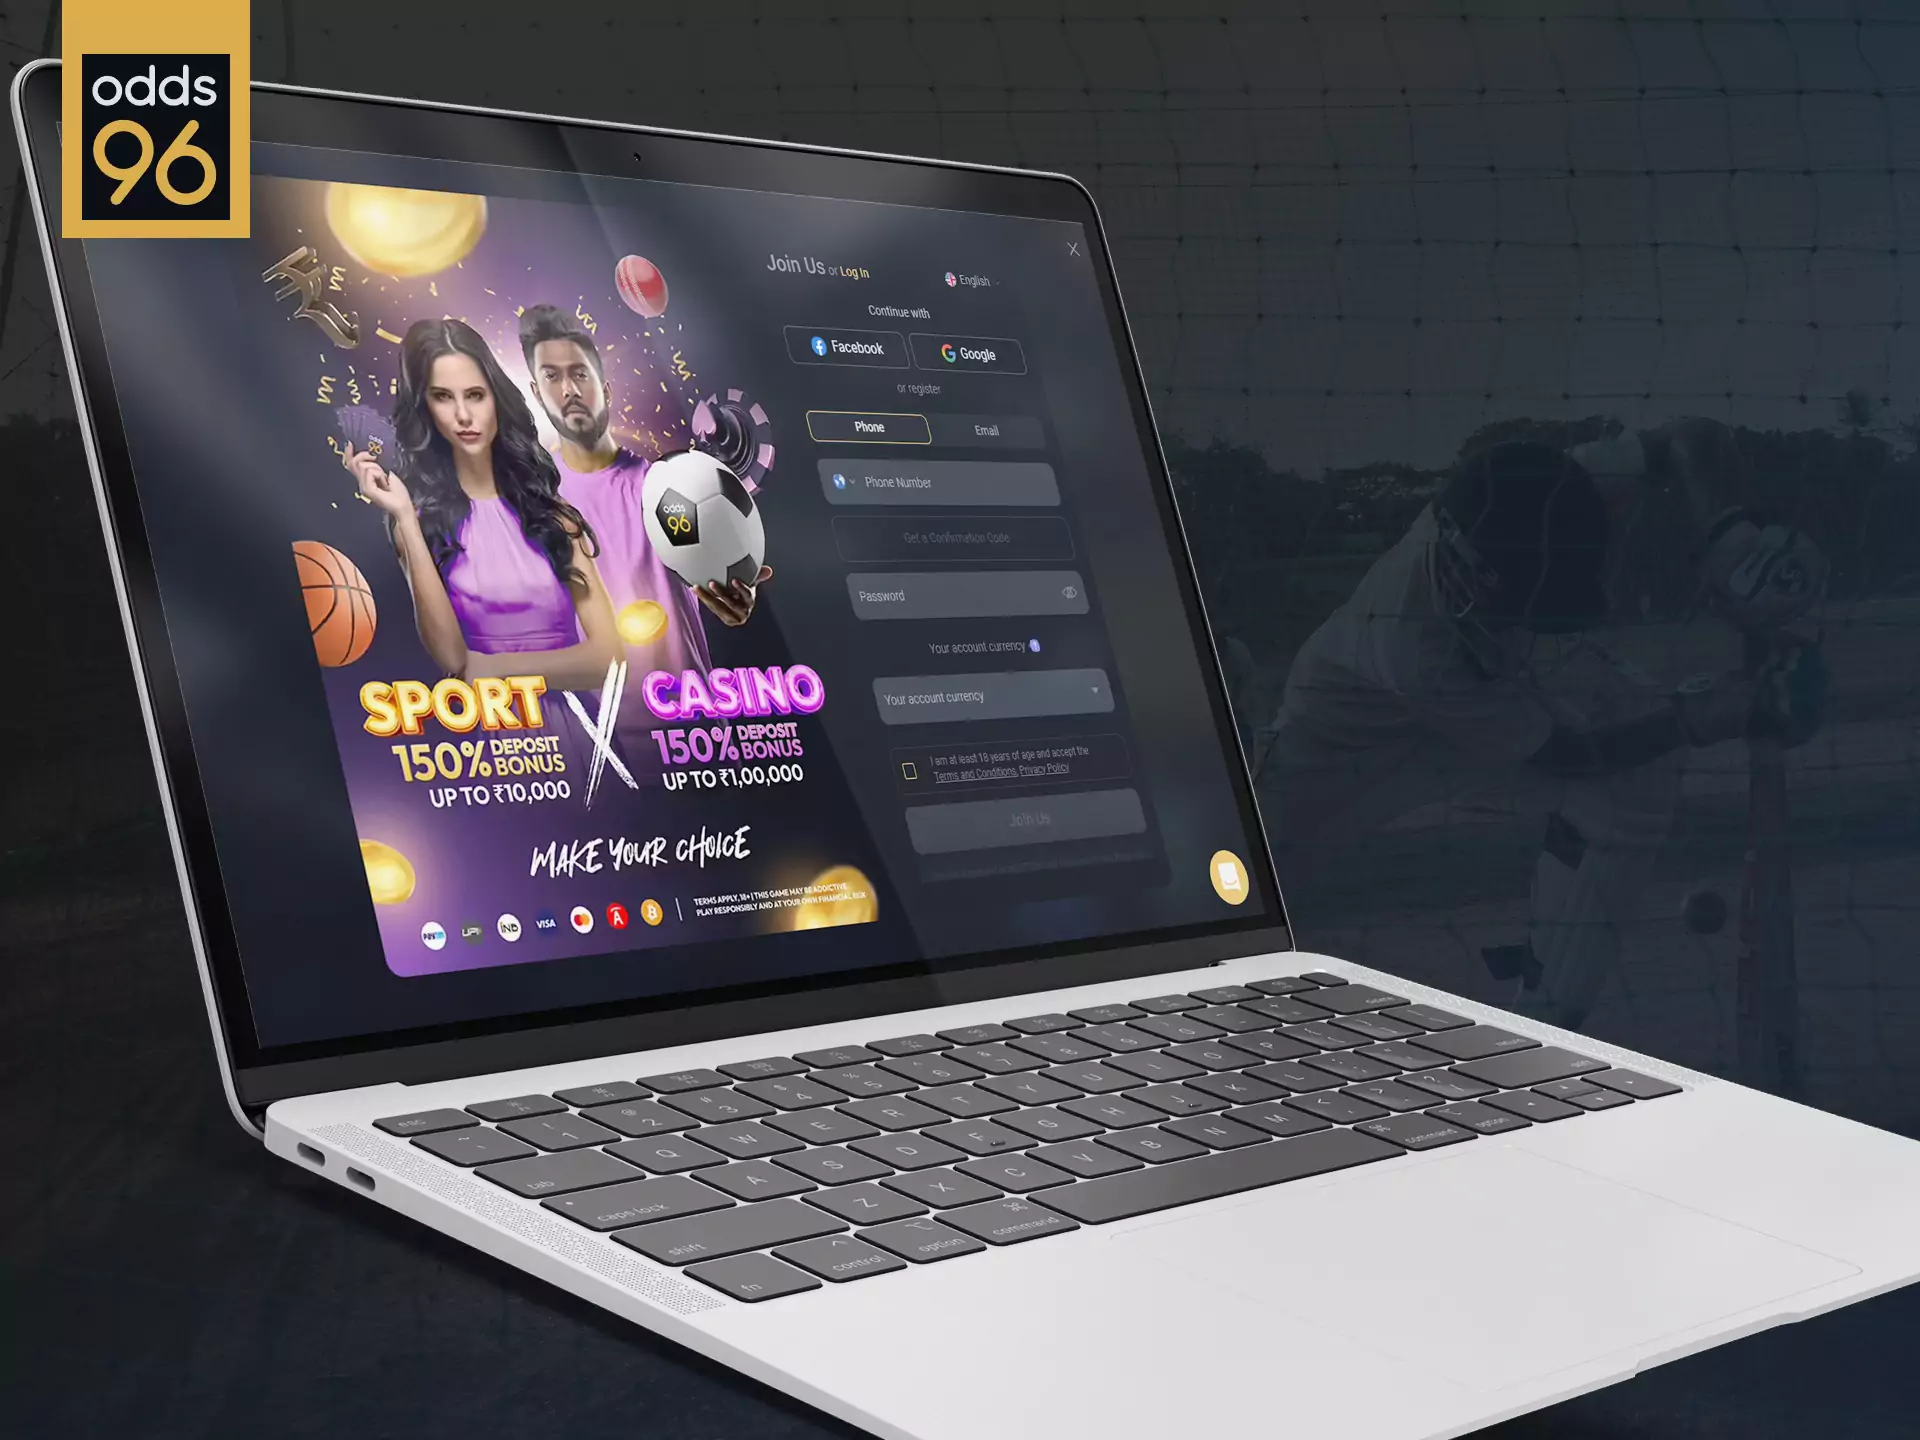 Register with Odds96 and place bets on any sports games and win at the casino.